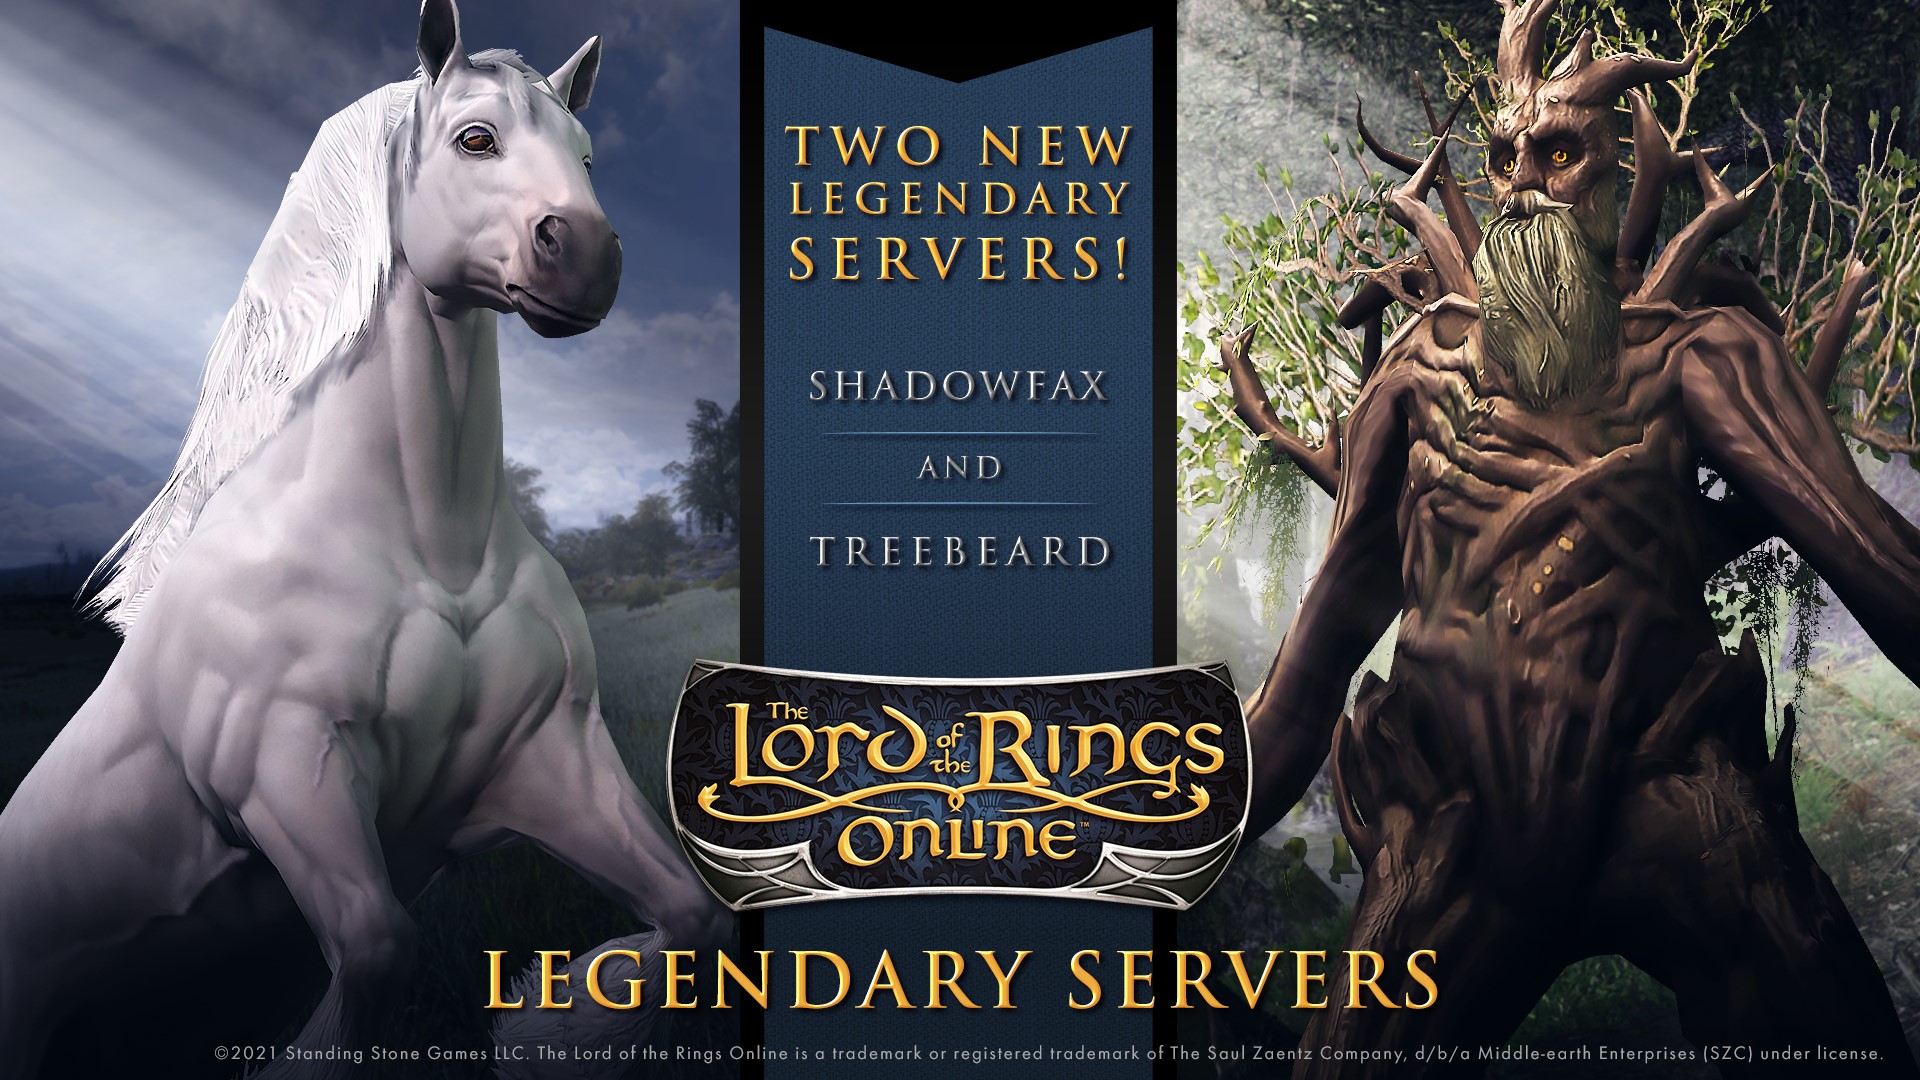 LOTRO’s Shadowfax and Treebeard Progression Servers Open Up New Content and Increase Level Cap